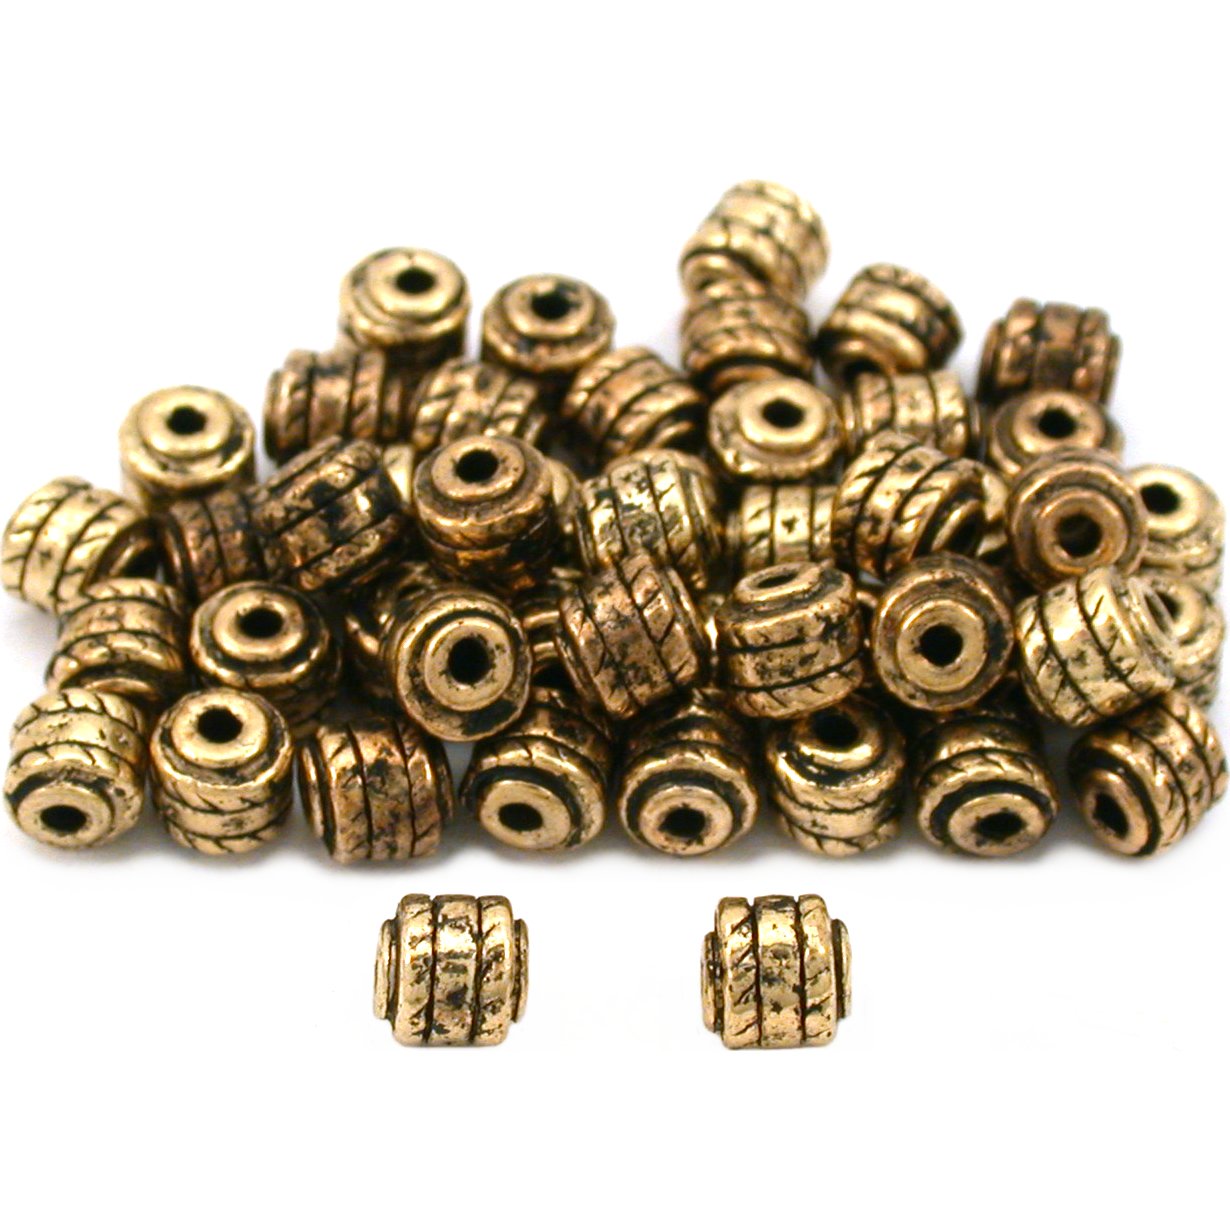 Bali Barrel Antique Gold Plated Beads 4.5mm 50Pcs Approx.